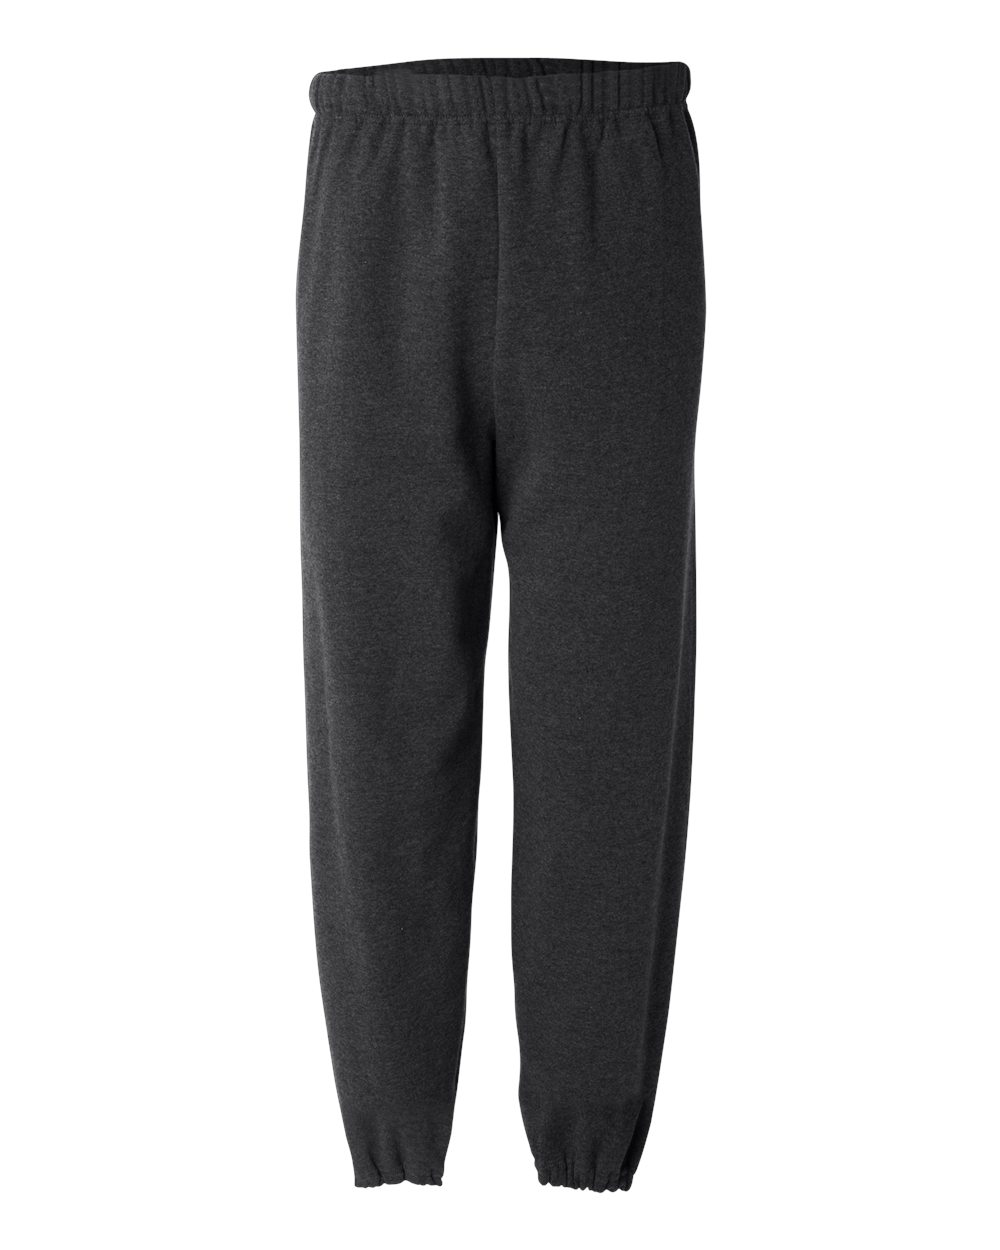 Premium Sweatpants for Every Occasion | 8 oz./yd² (US), 50/50  Cotton/Polyester | Unmatched Comfort Meets Versatility Trendy Sweatpants |  Stay Cozy in